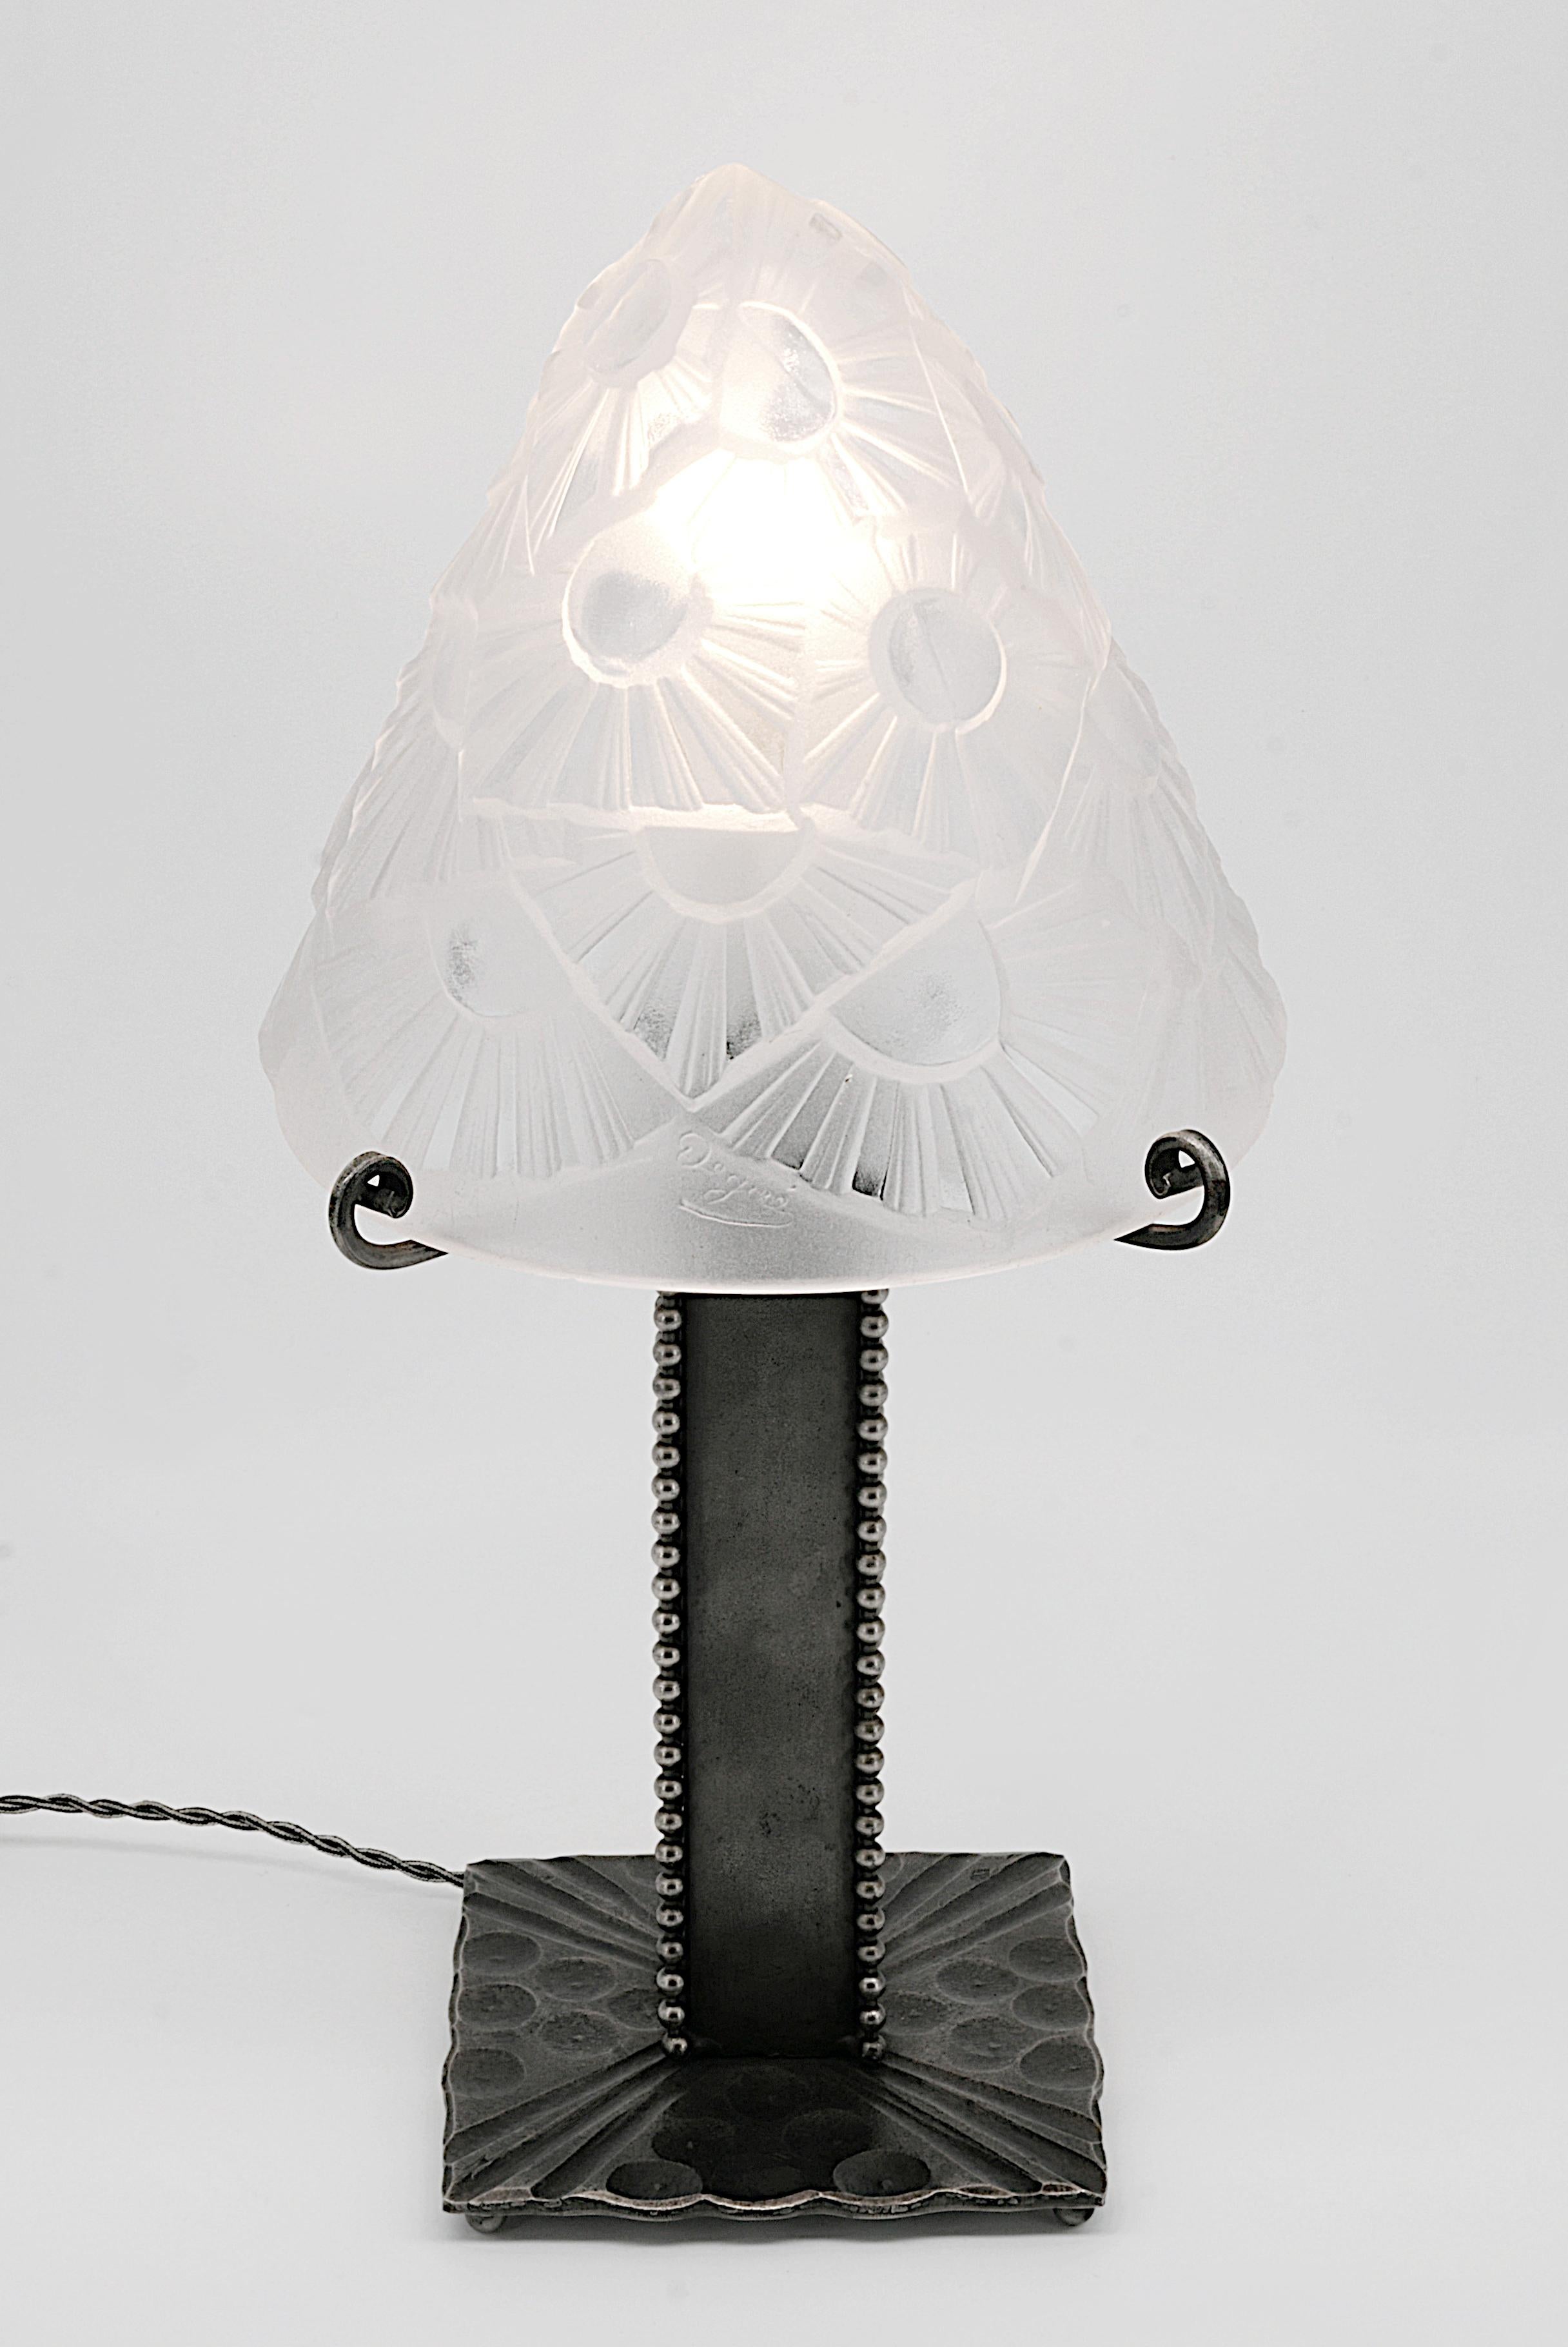 Frosted Degue & Marcel Vasseur French Art Deco Table Lamp, Late 1920s